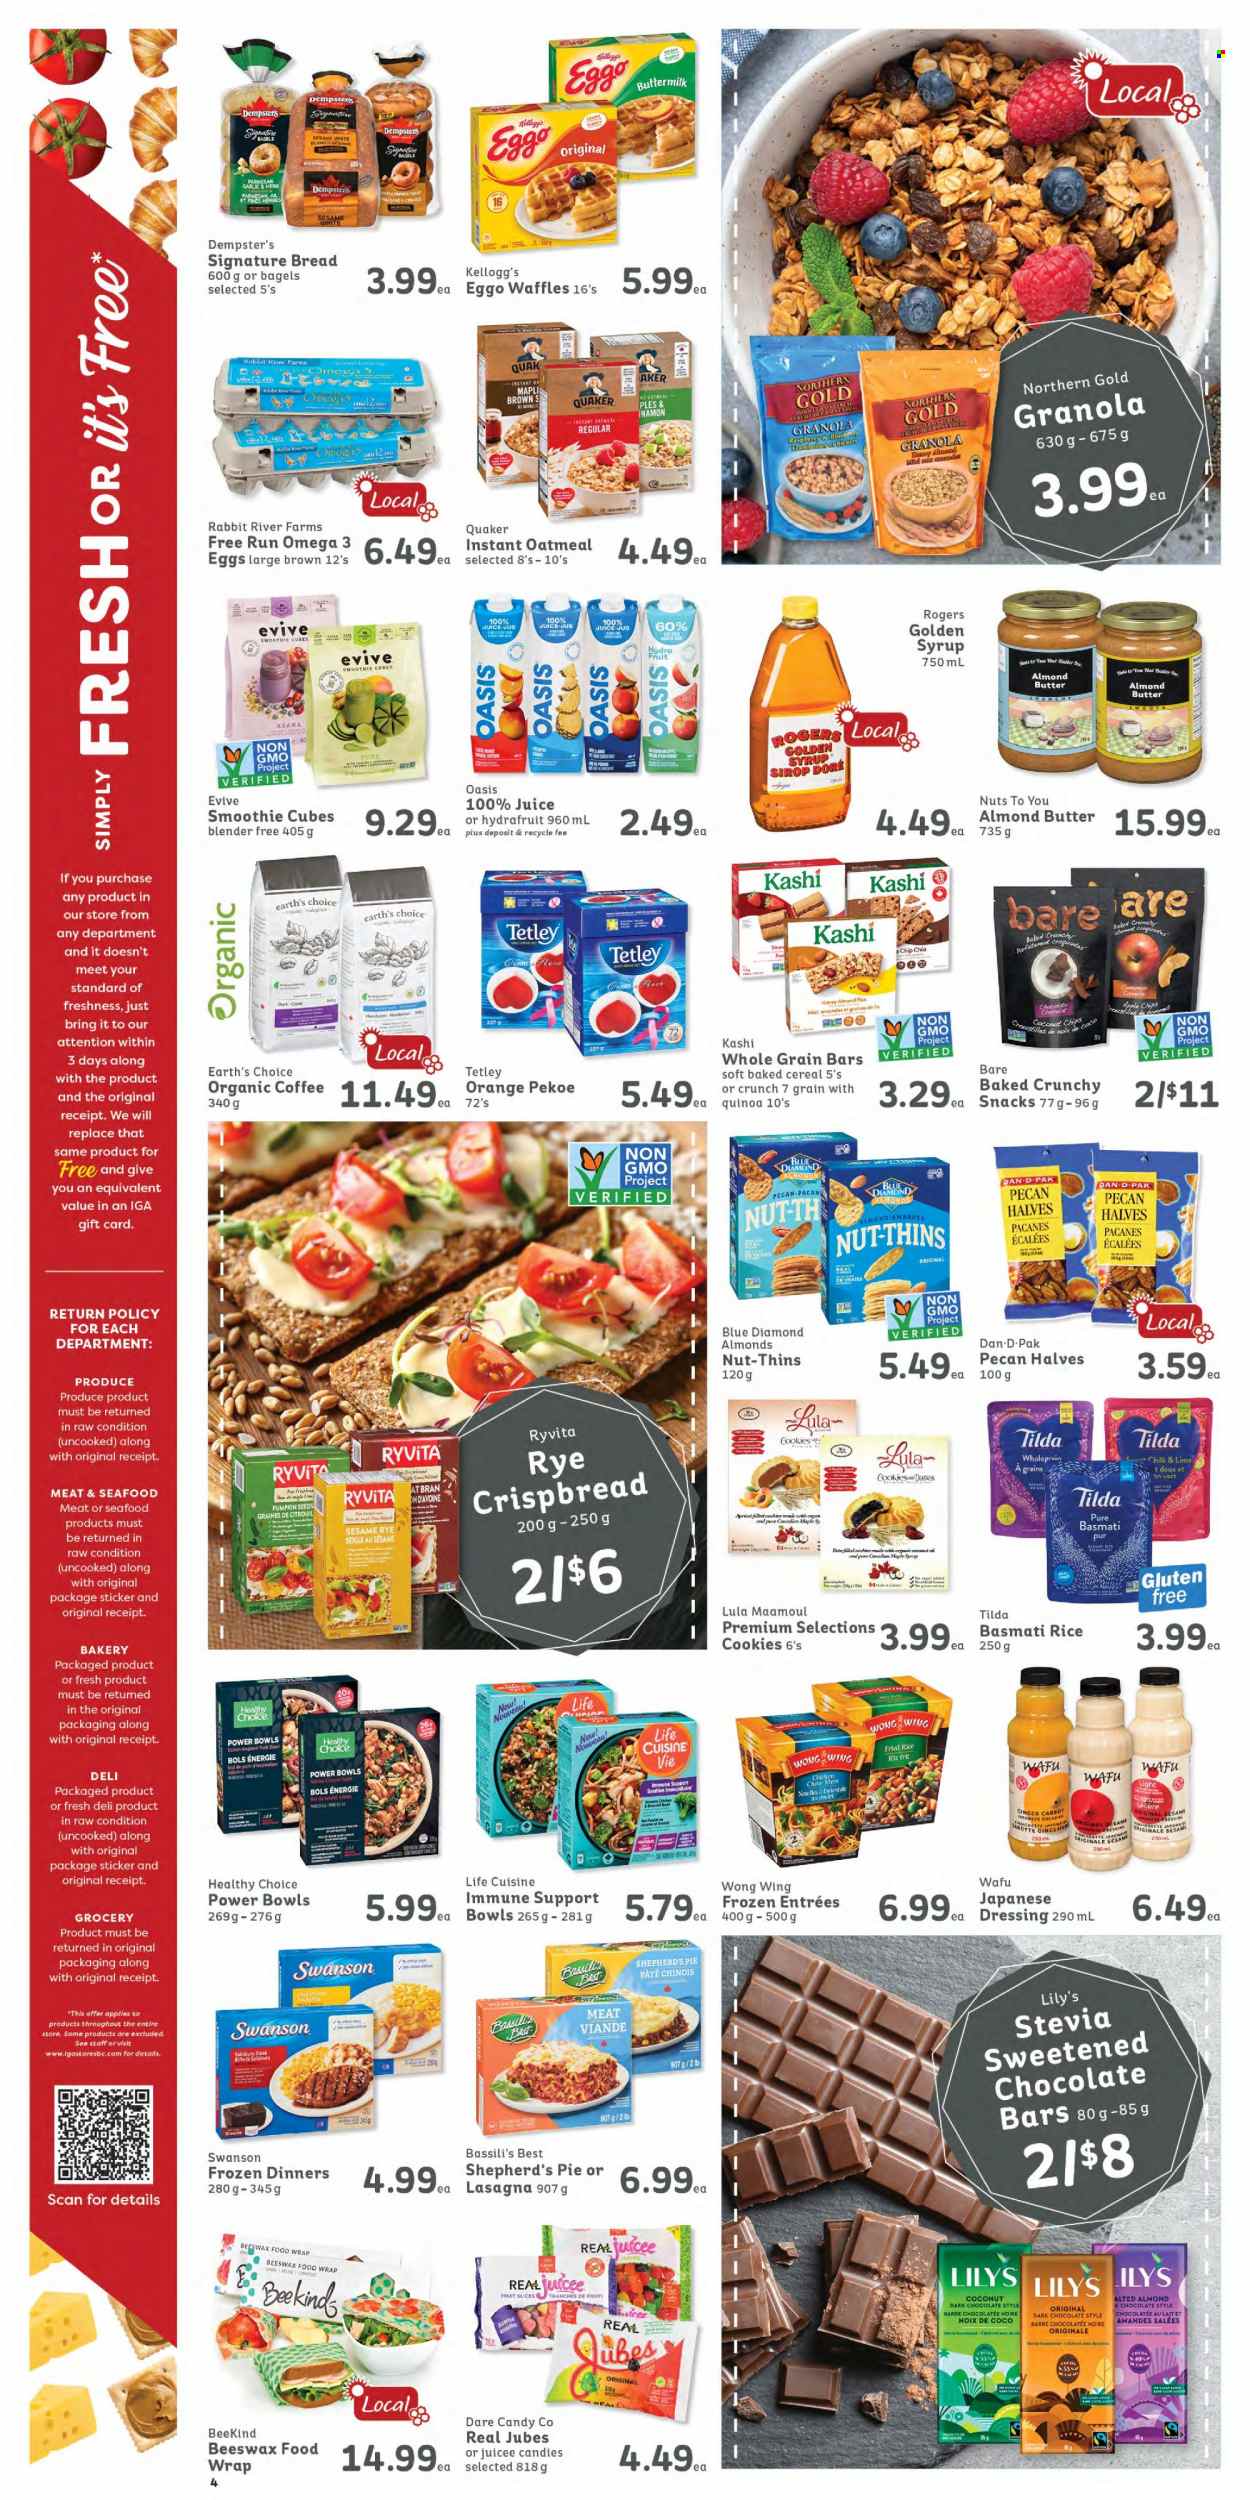 thumbnail - IGA Simple Goodness Flyer - June 02, 2023 - June 08, 2023 - Sales products - bagels, bread, pie, waffles, rye crispbread, crispbread, ginger, oranges, seafood, Quaker, lasagna meal, Healthy Choice, ready meal, snack, buttermilk, eggs, almond butter, cookies, rabbit, Kellogg's, dark chocolate, ma'amoul, fruit slices, chocolate bar, Thins, oatmeal, stevia, cereals, basmati rice, cinnamon, dressing, coconut oil, maple syrup, syrup, nut butter, almonds, pumpkin seeds, Blue Diamond, juice, organic coffee, chicken, steak, granola, quinoa. Page 4.